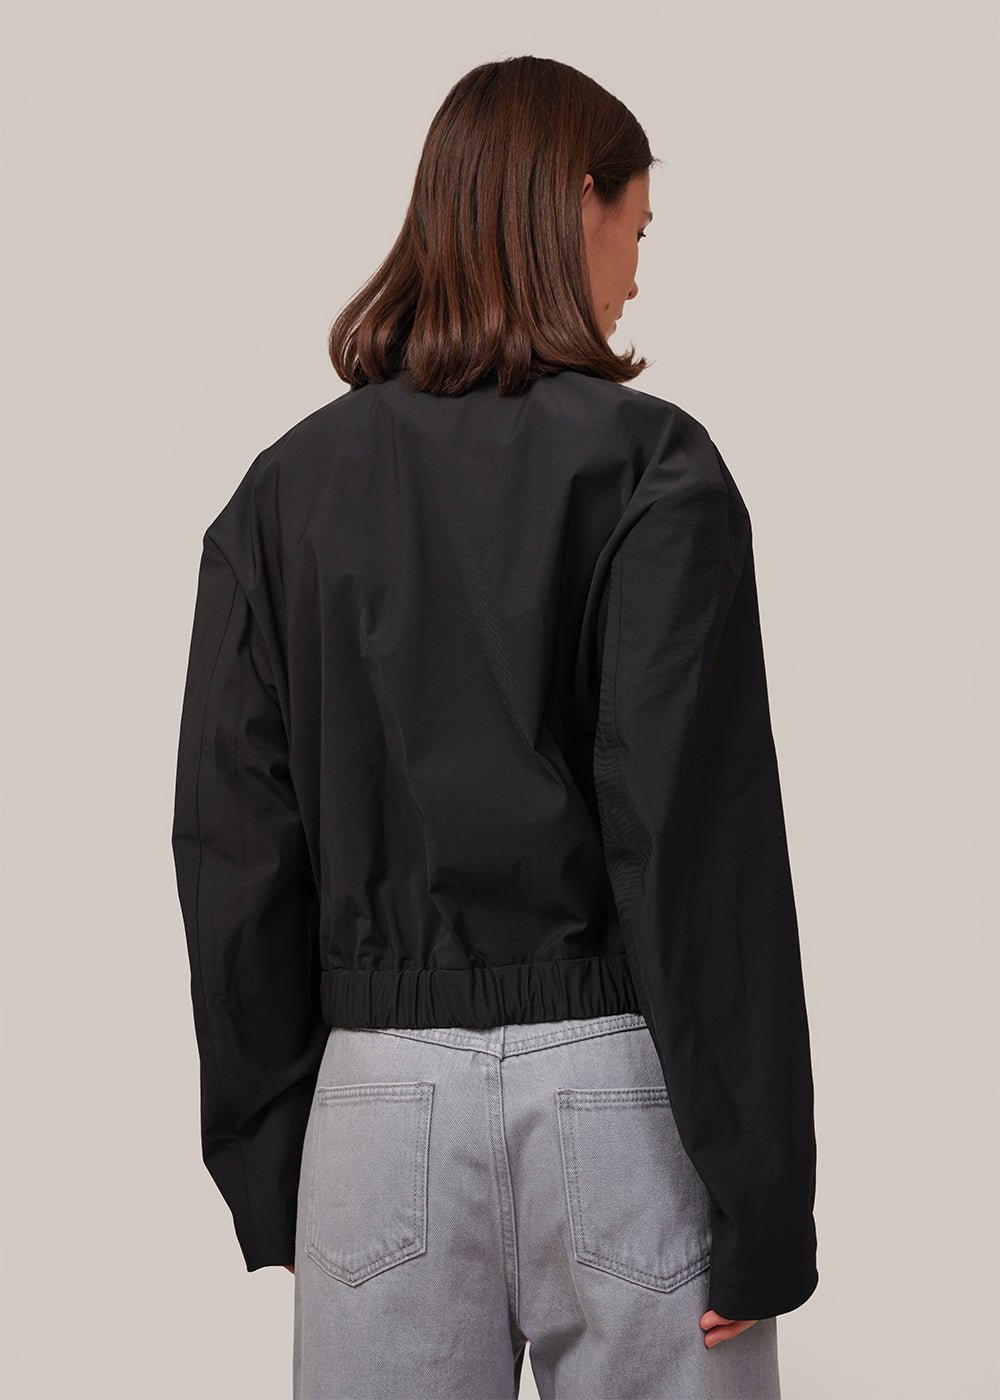 AMOMENTO Black Reversible Crop Jumper - New Classics Studios Sustainable Ethical Fashion Canada